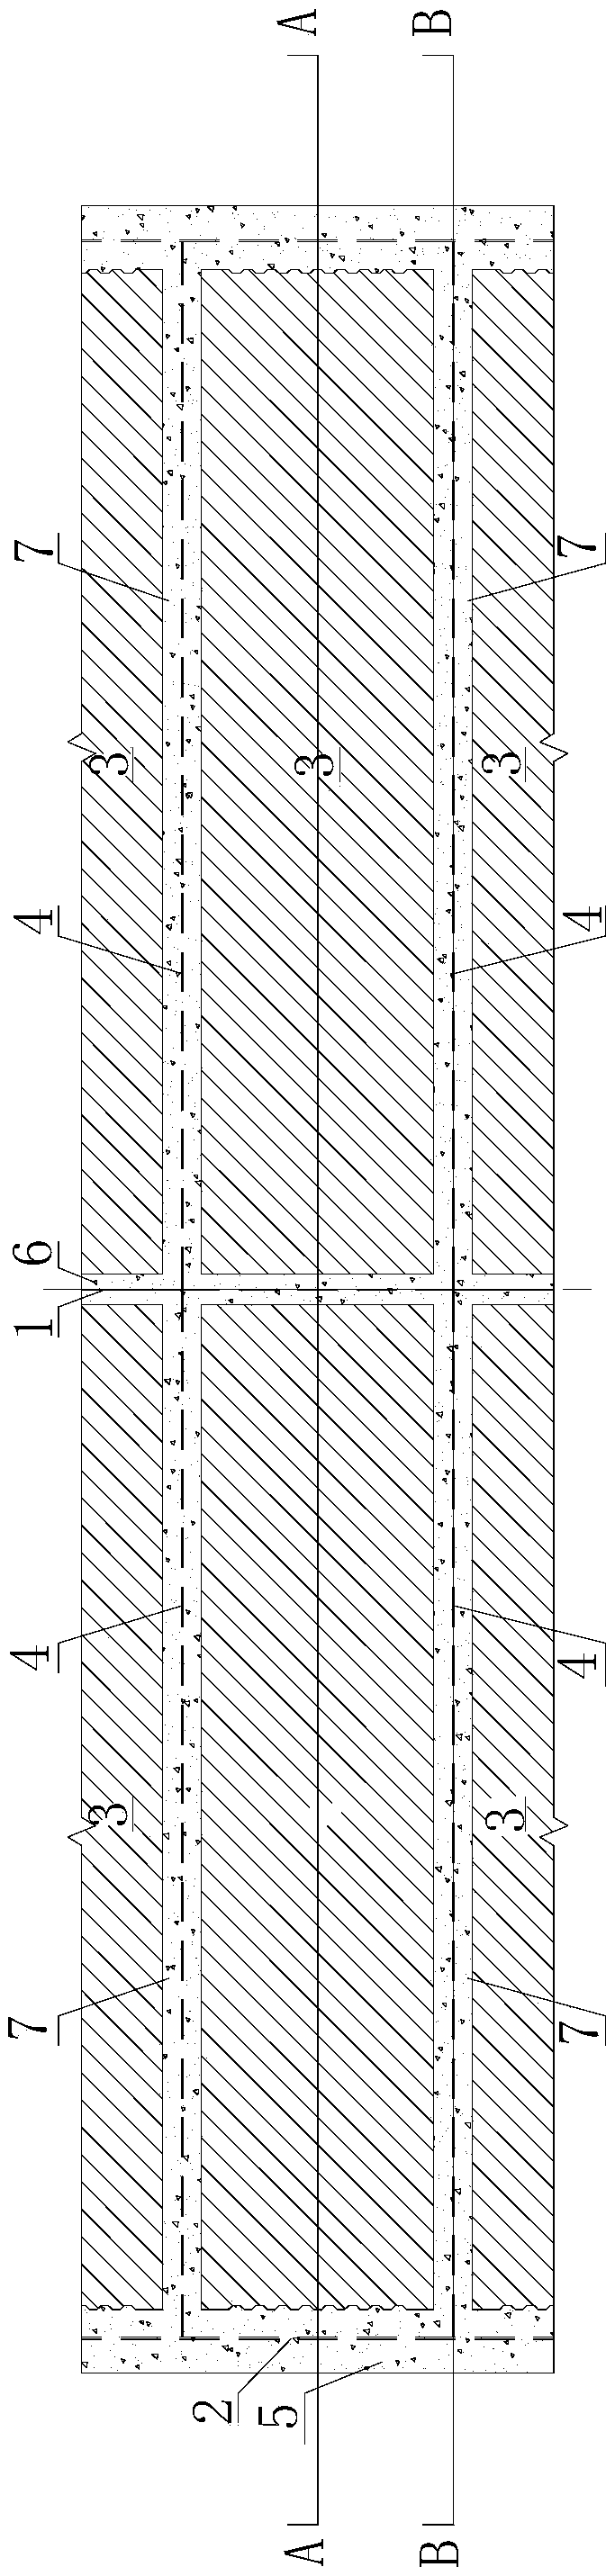 SteeL-UHPC combination beam for cabLe-stayed bridge and construction method